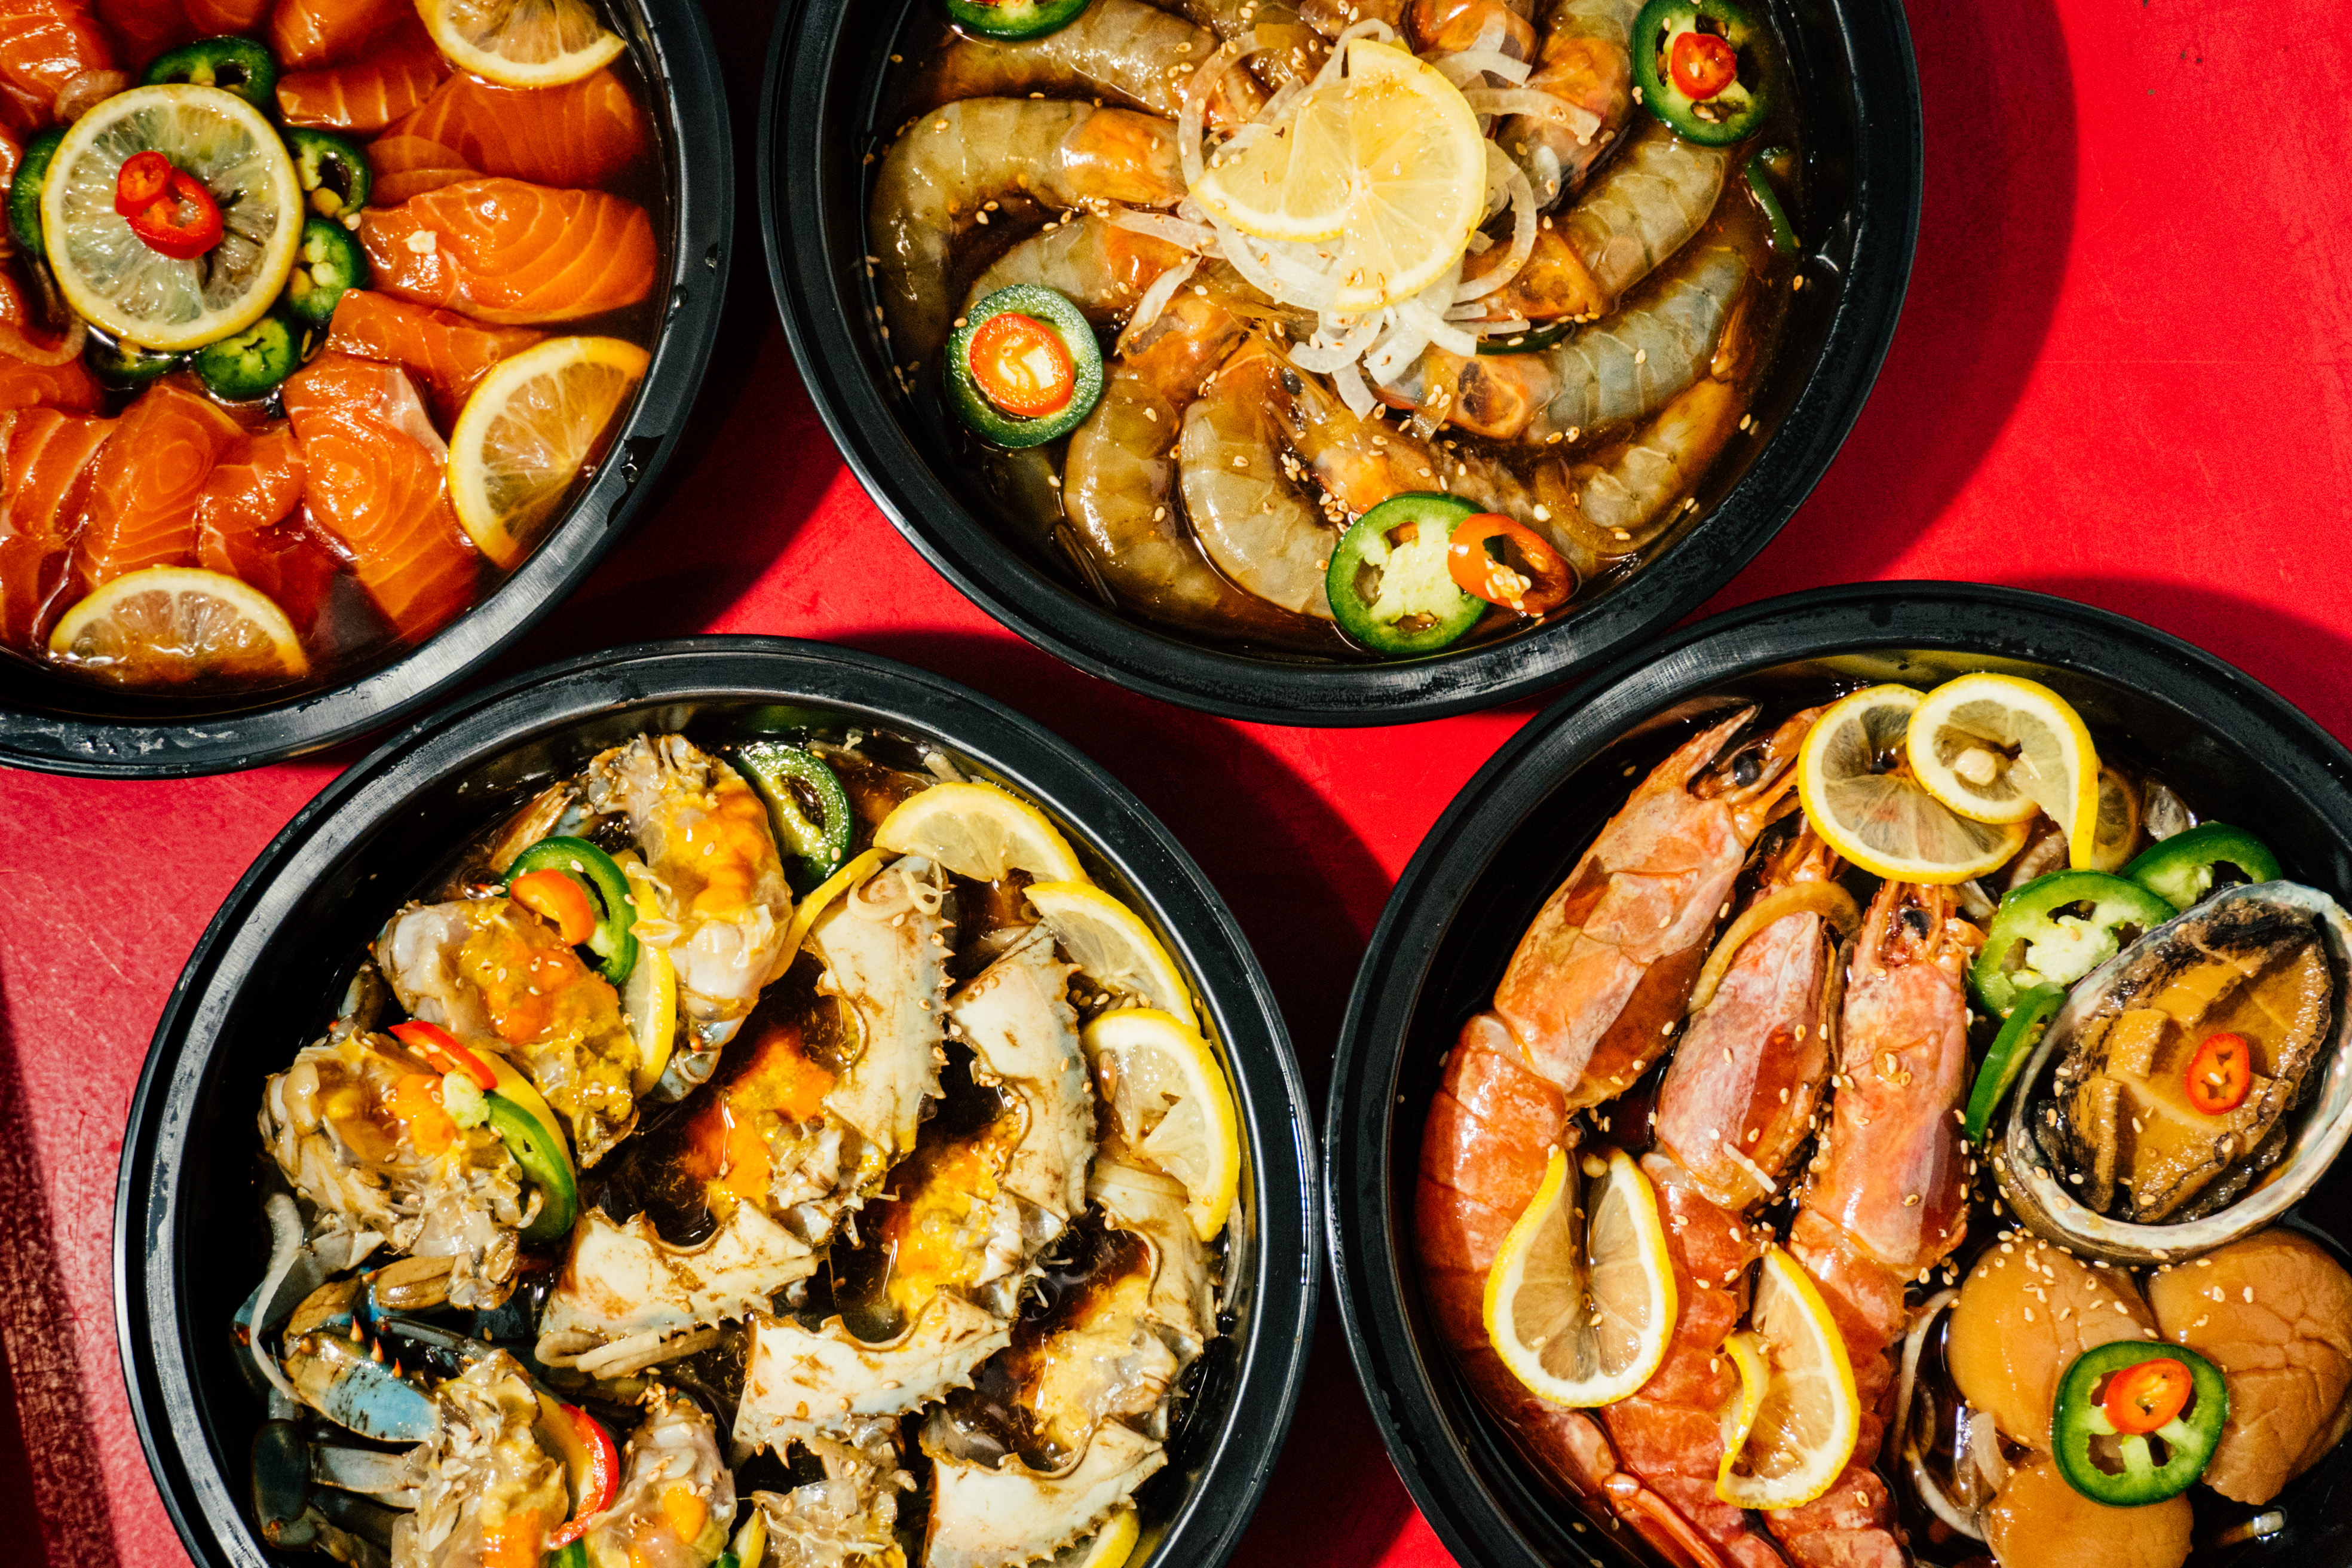 A selection of seafood dishes in plastic containers on a red backdrop.